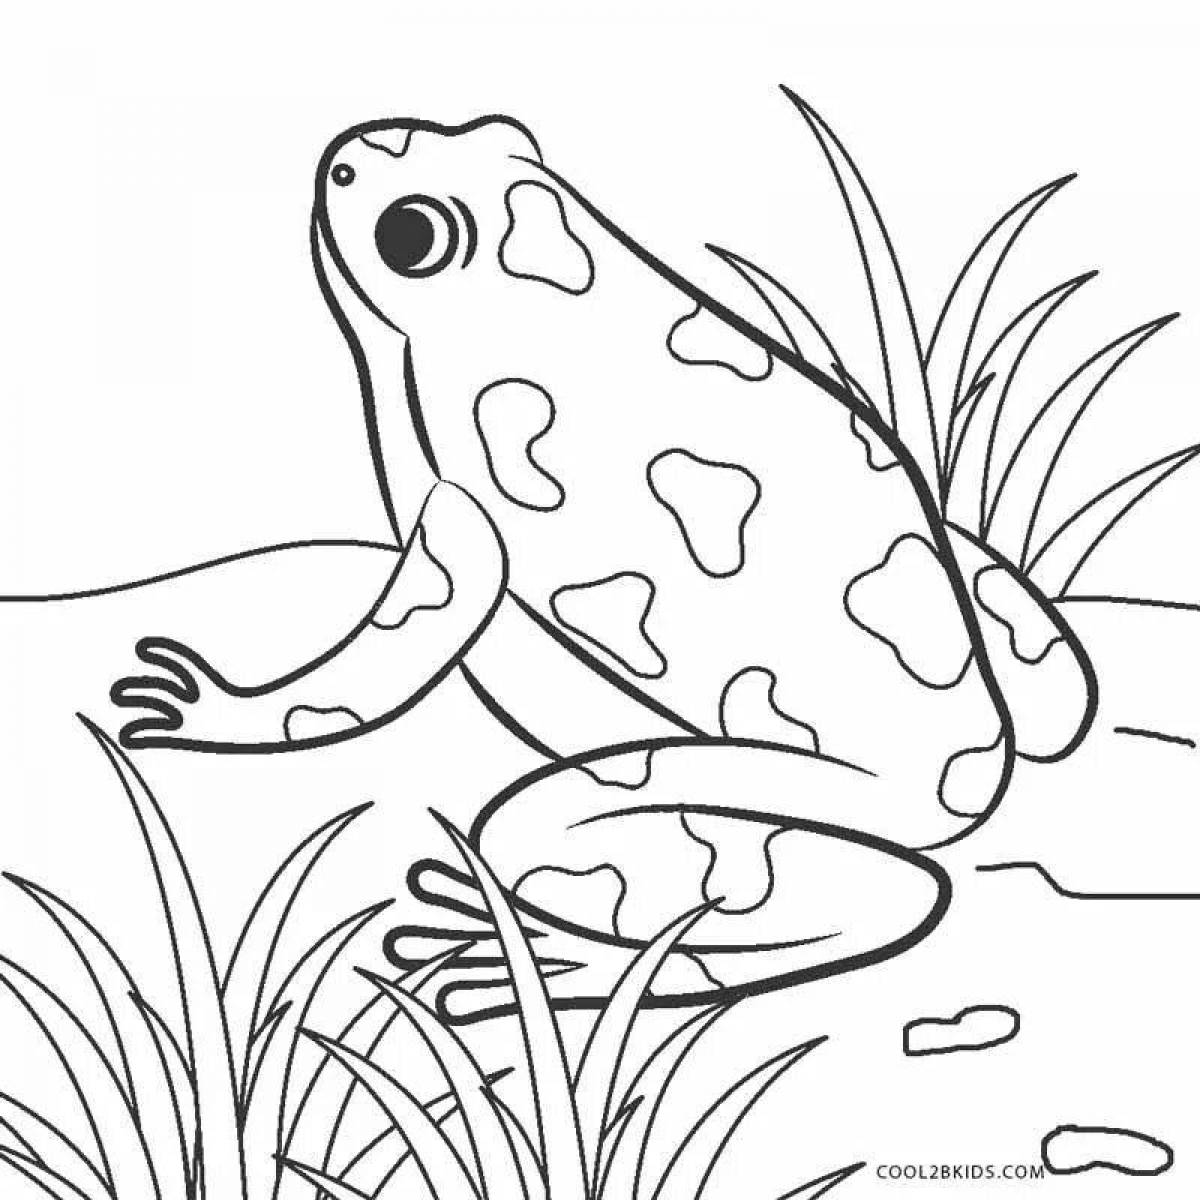 Coloring jovial frog aesthetics